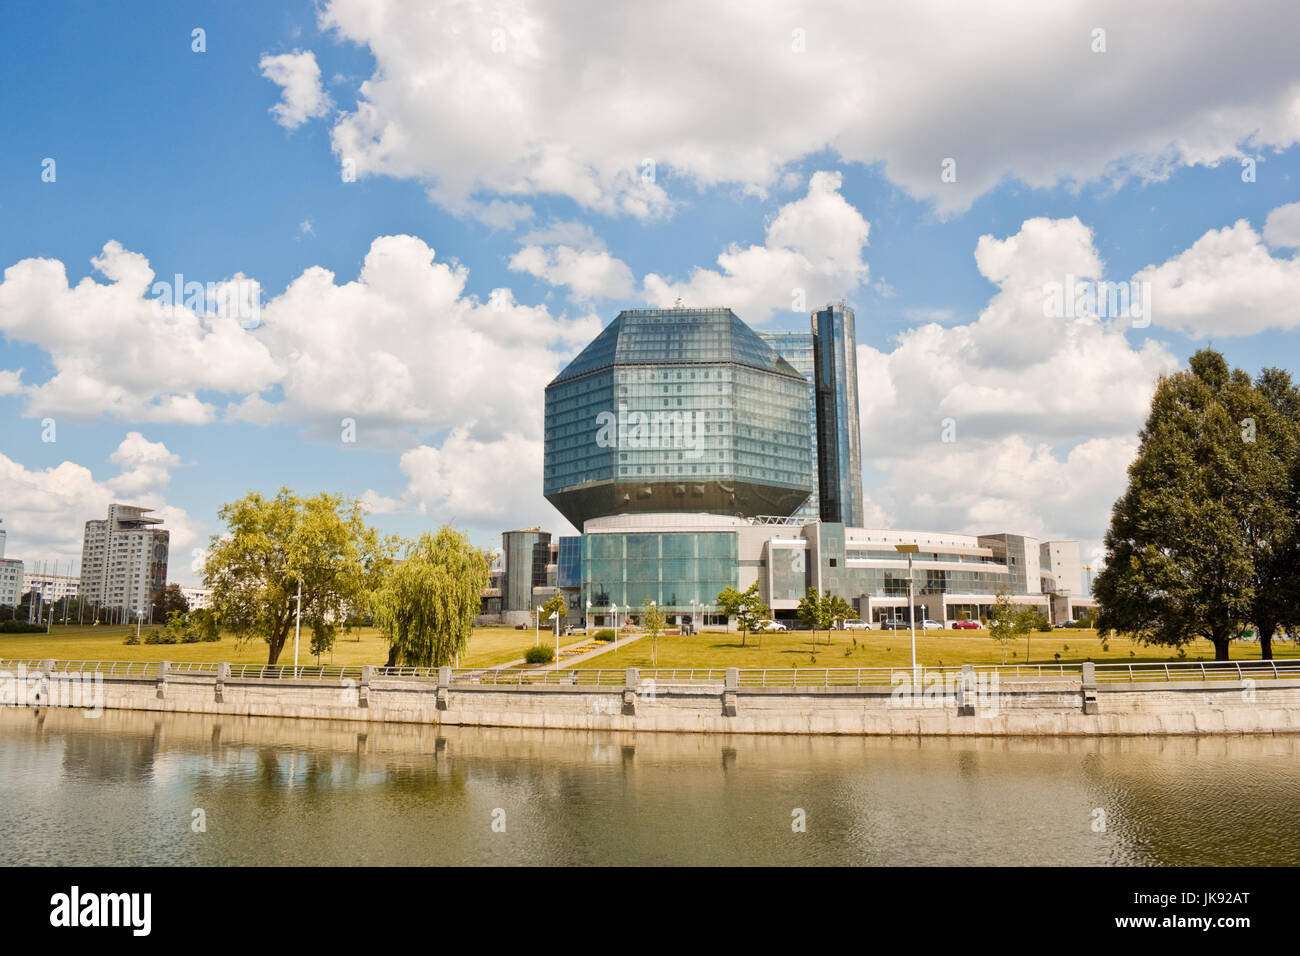 Minsk, Belarus - July 22, 2014: A view of modern building of National library of Belarus. Stock Photo